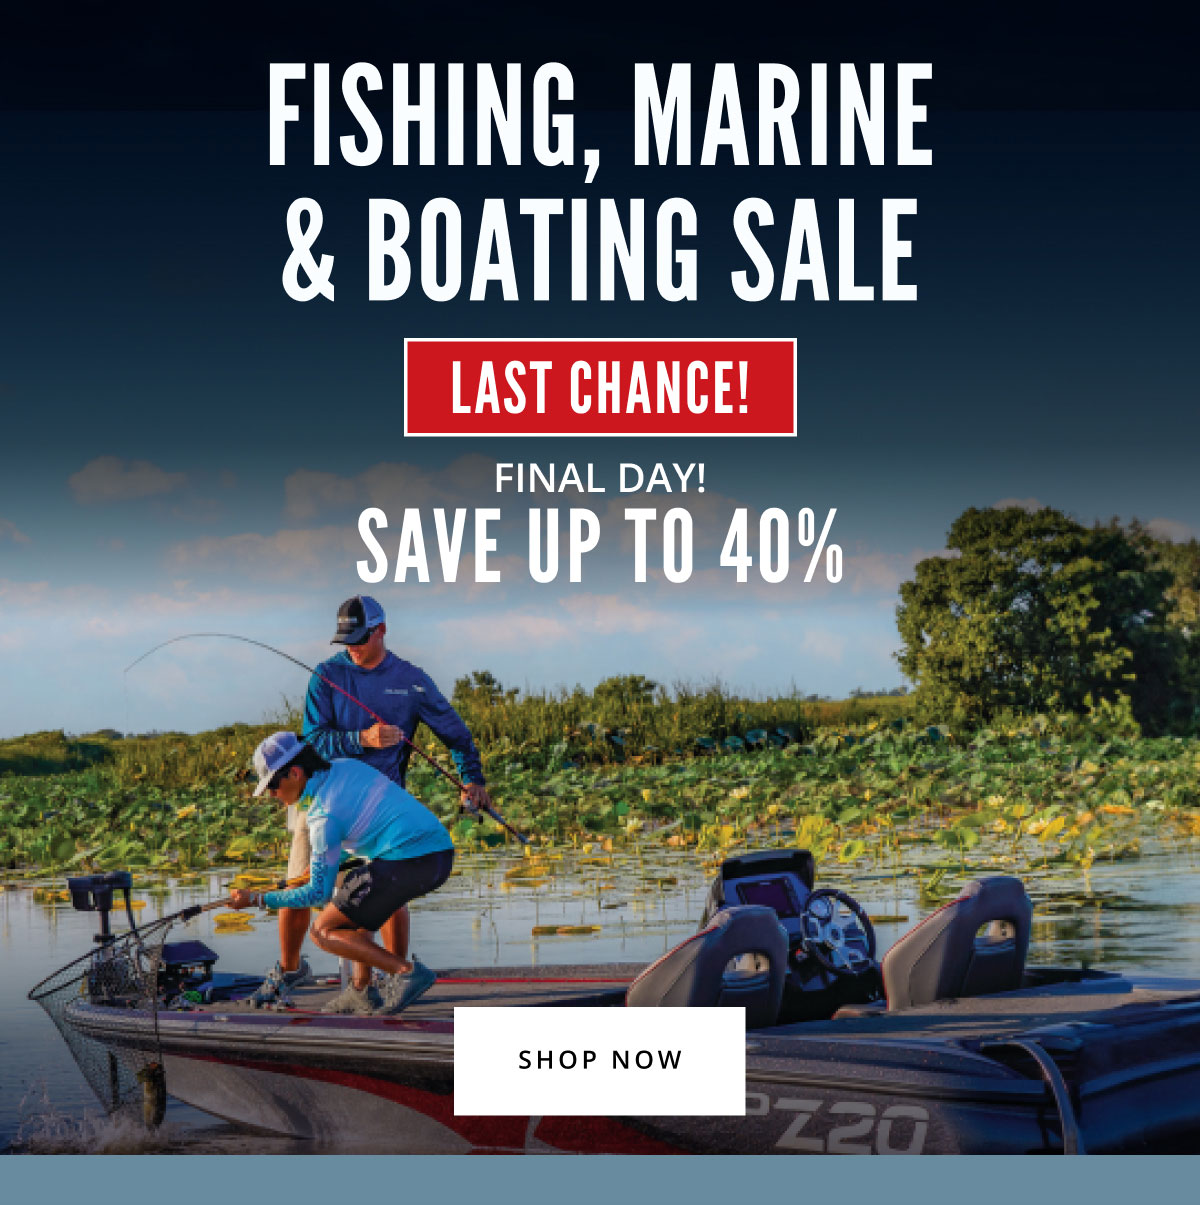 Final Days To Save During The Fishing, Boating, & Marine Sale